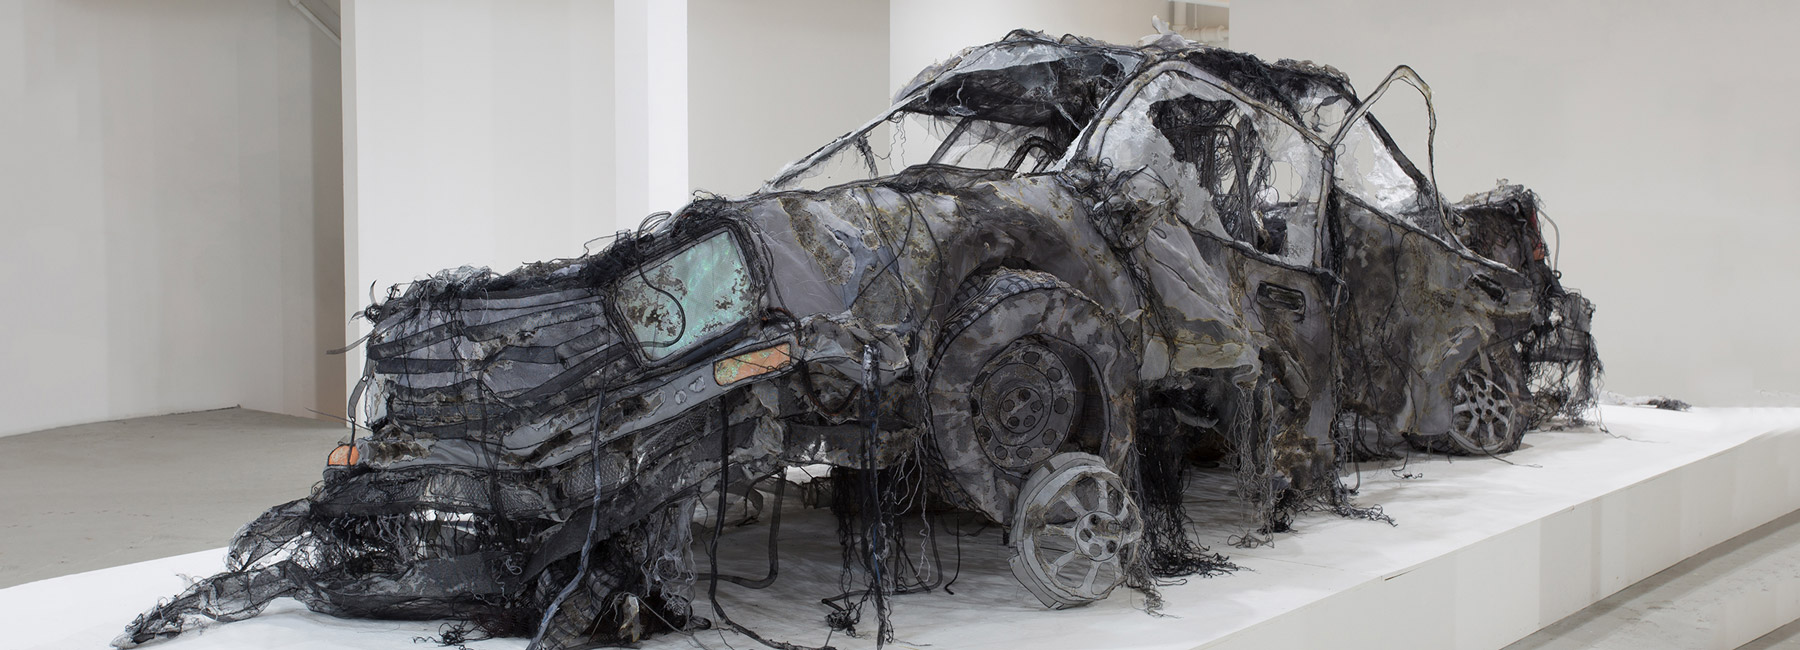 this full-scale demolished car is constructed from ghost-like textiles by jannick deslauriers